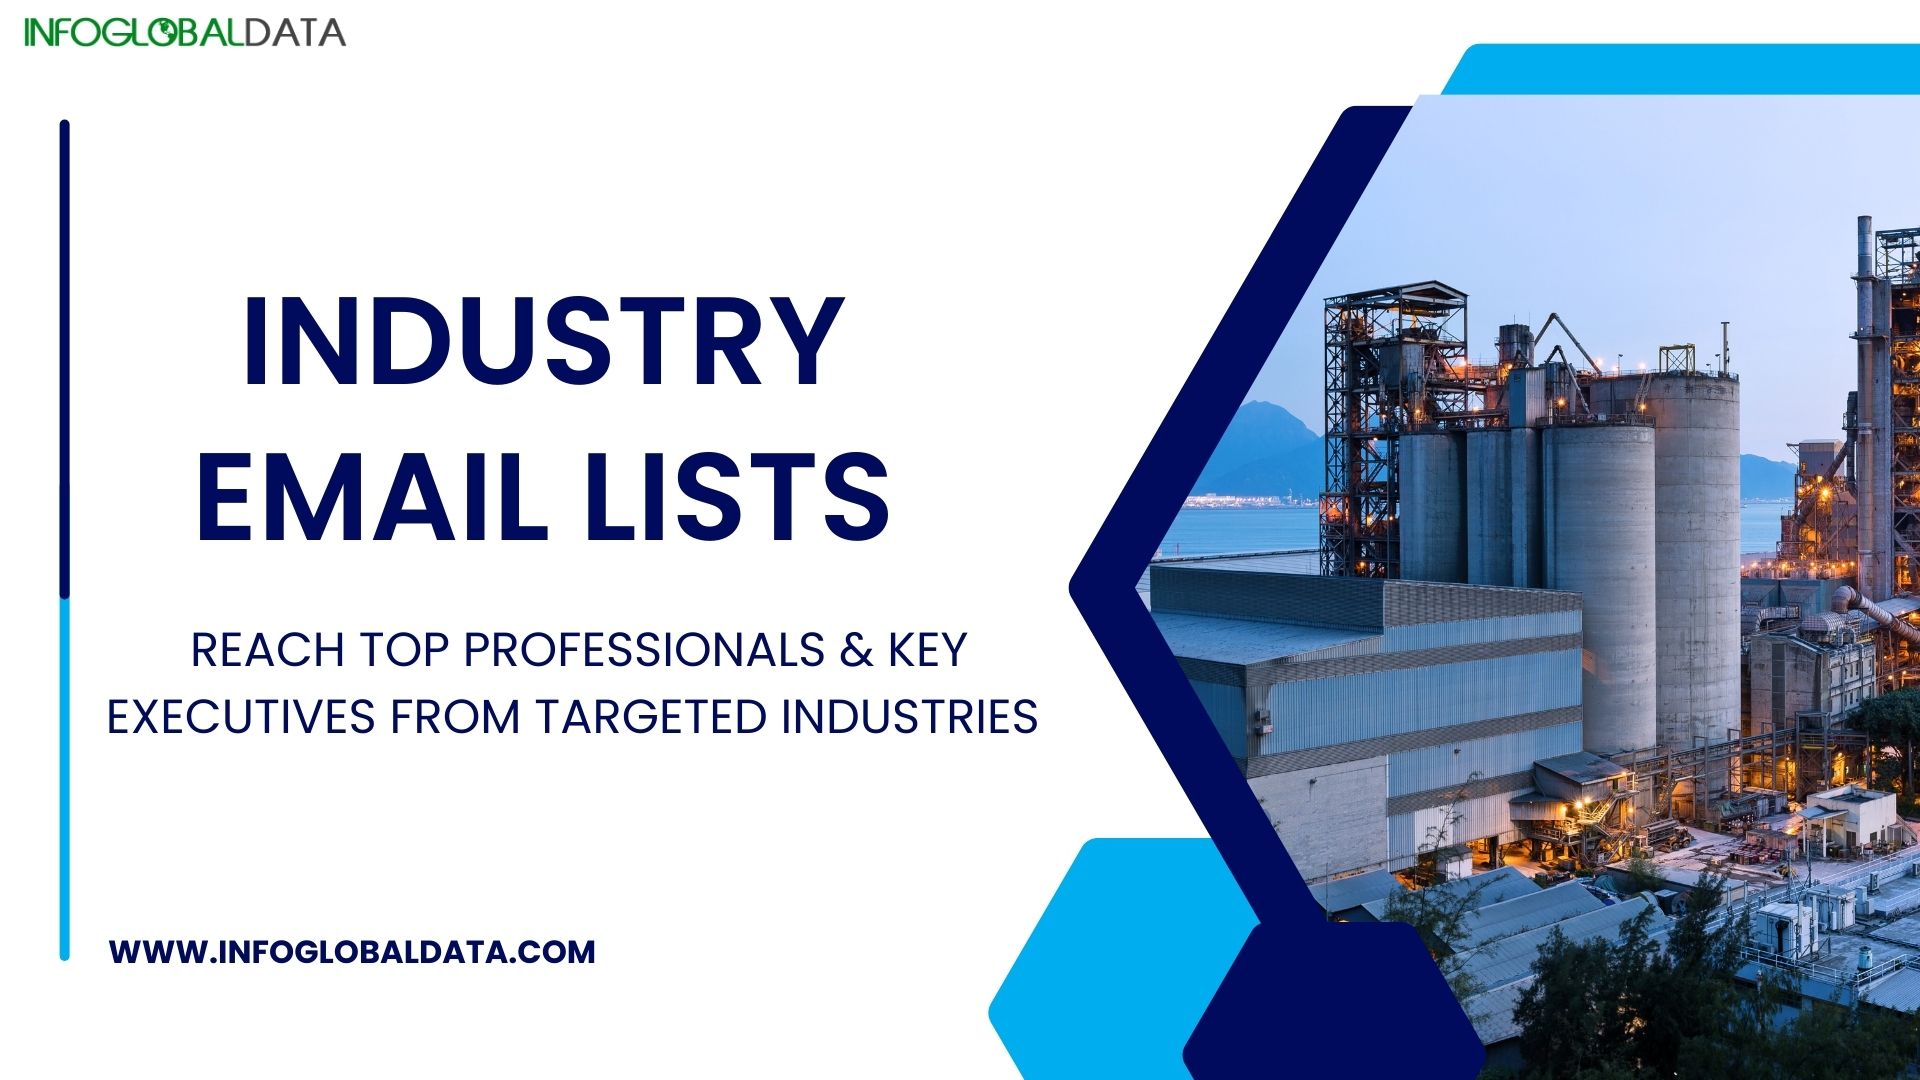 Industry Email List